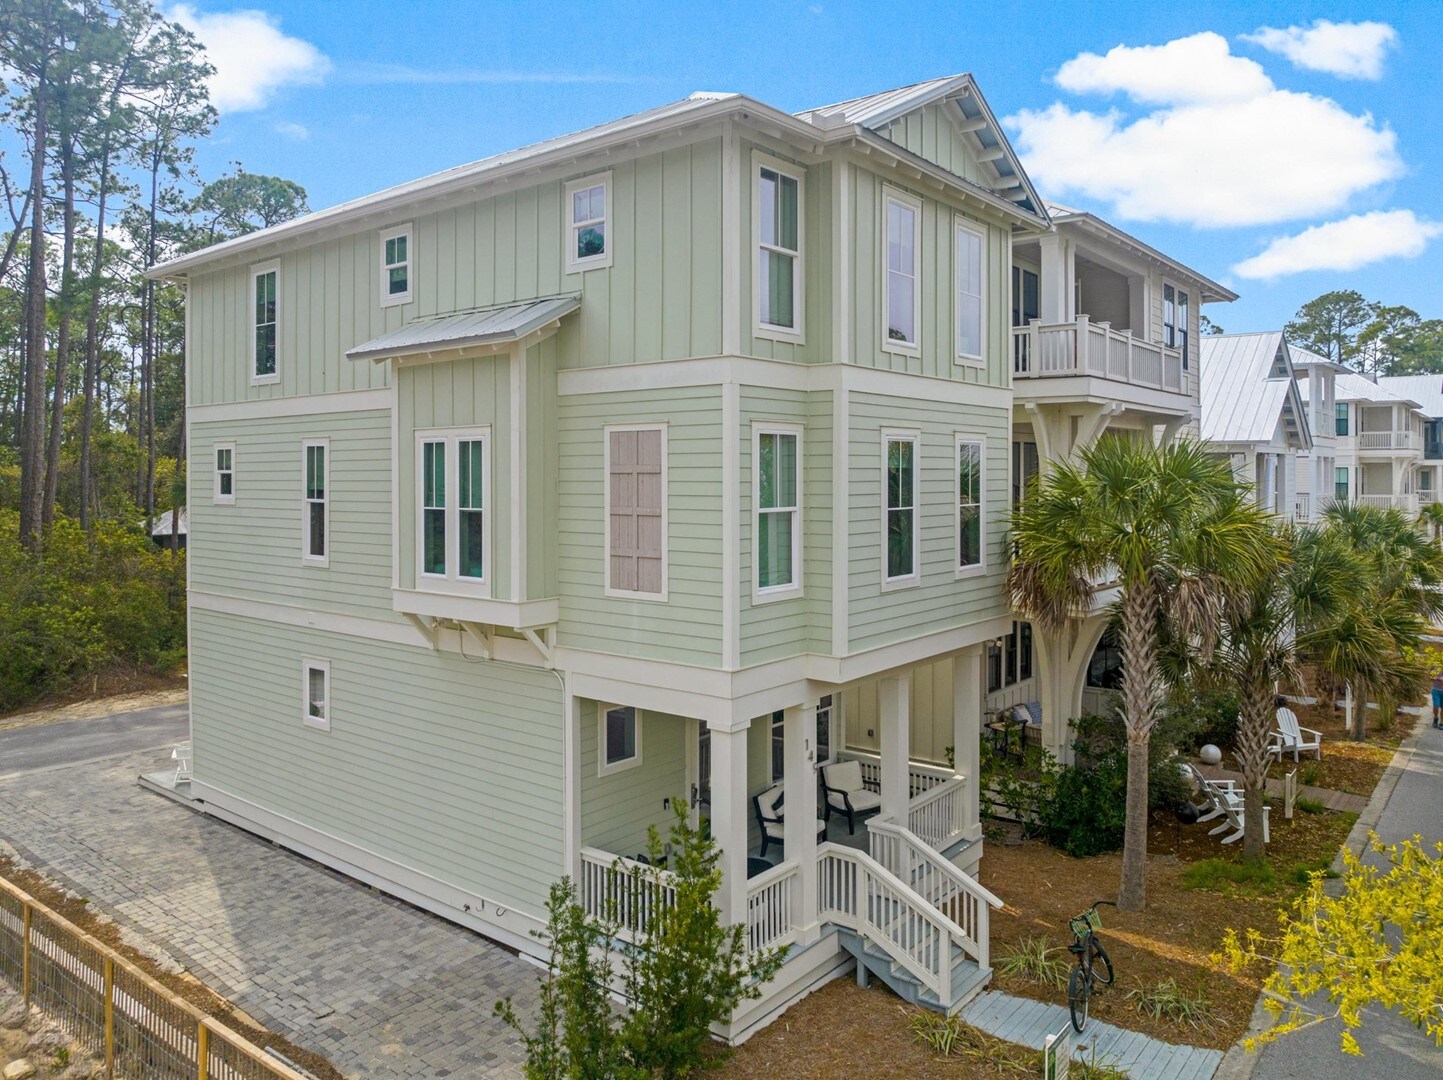 30A Beach House - Summerwind at Treetops